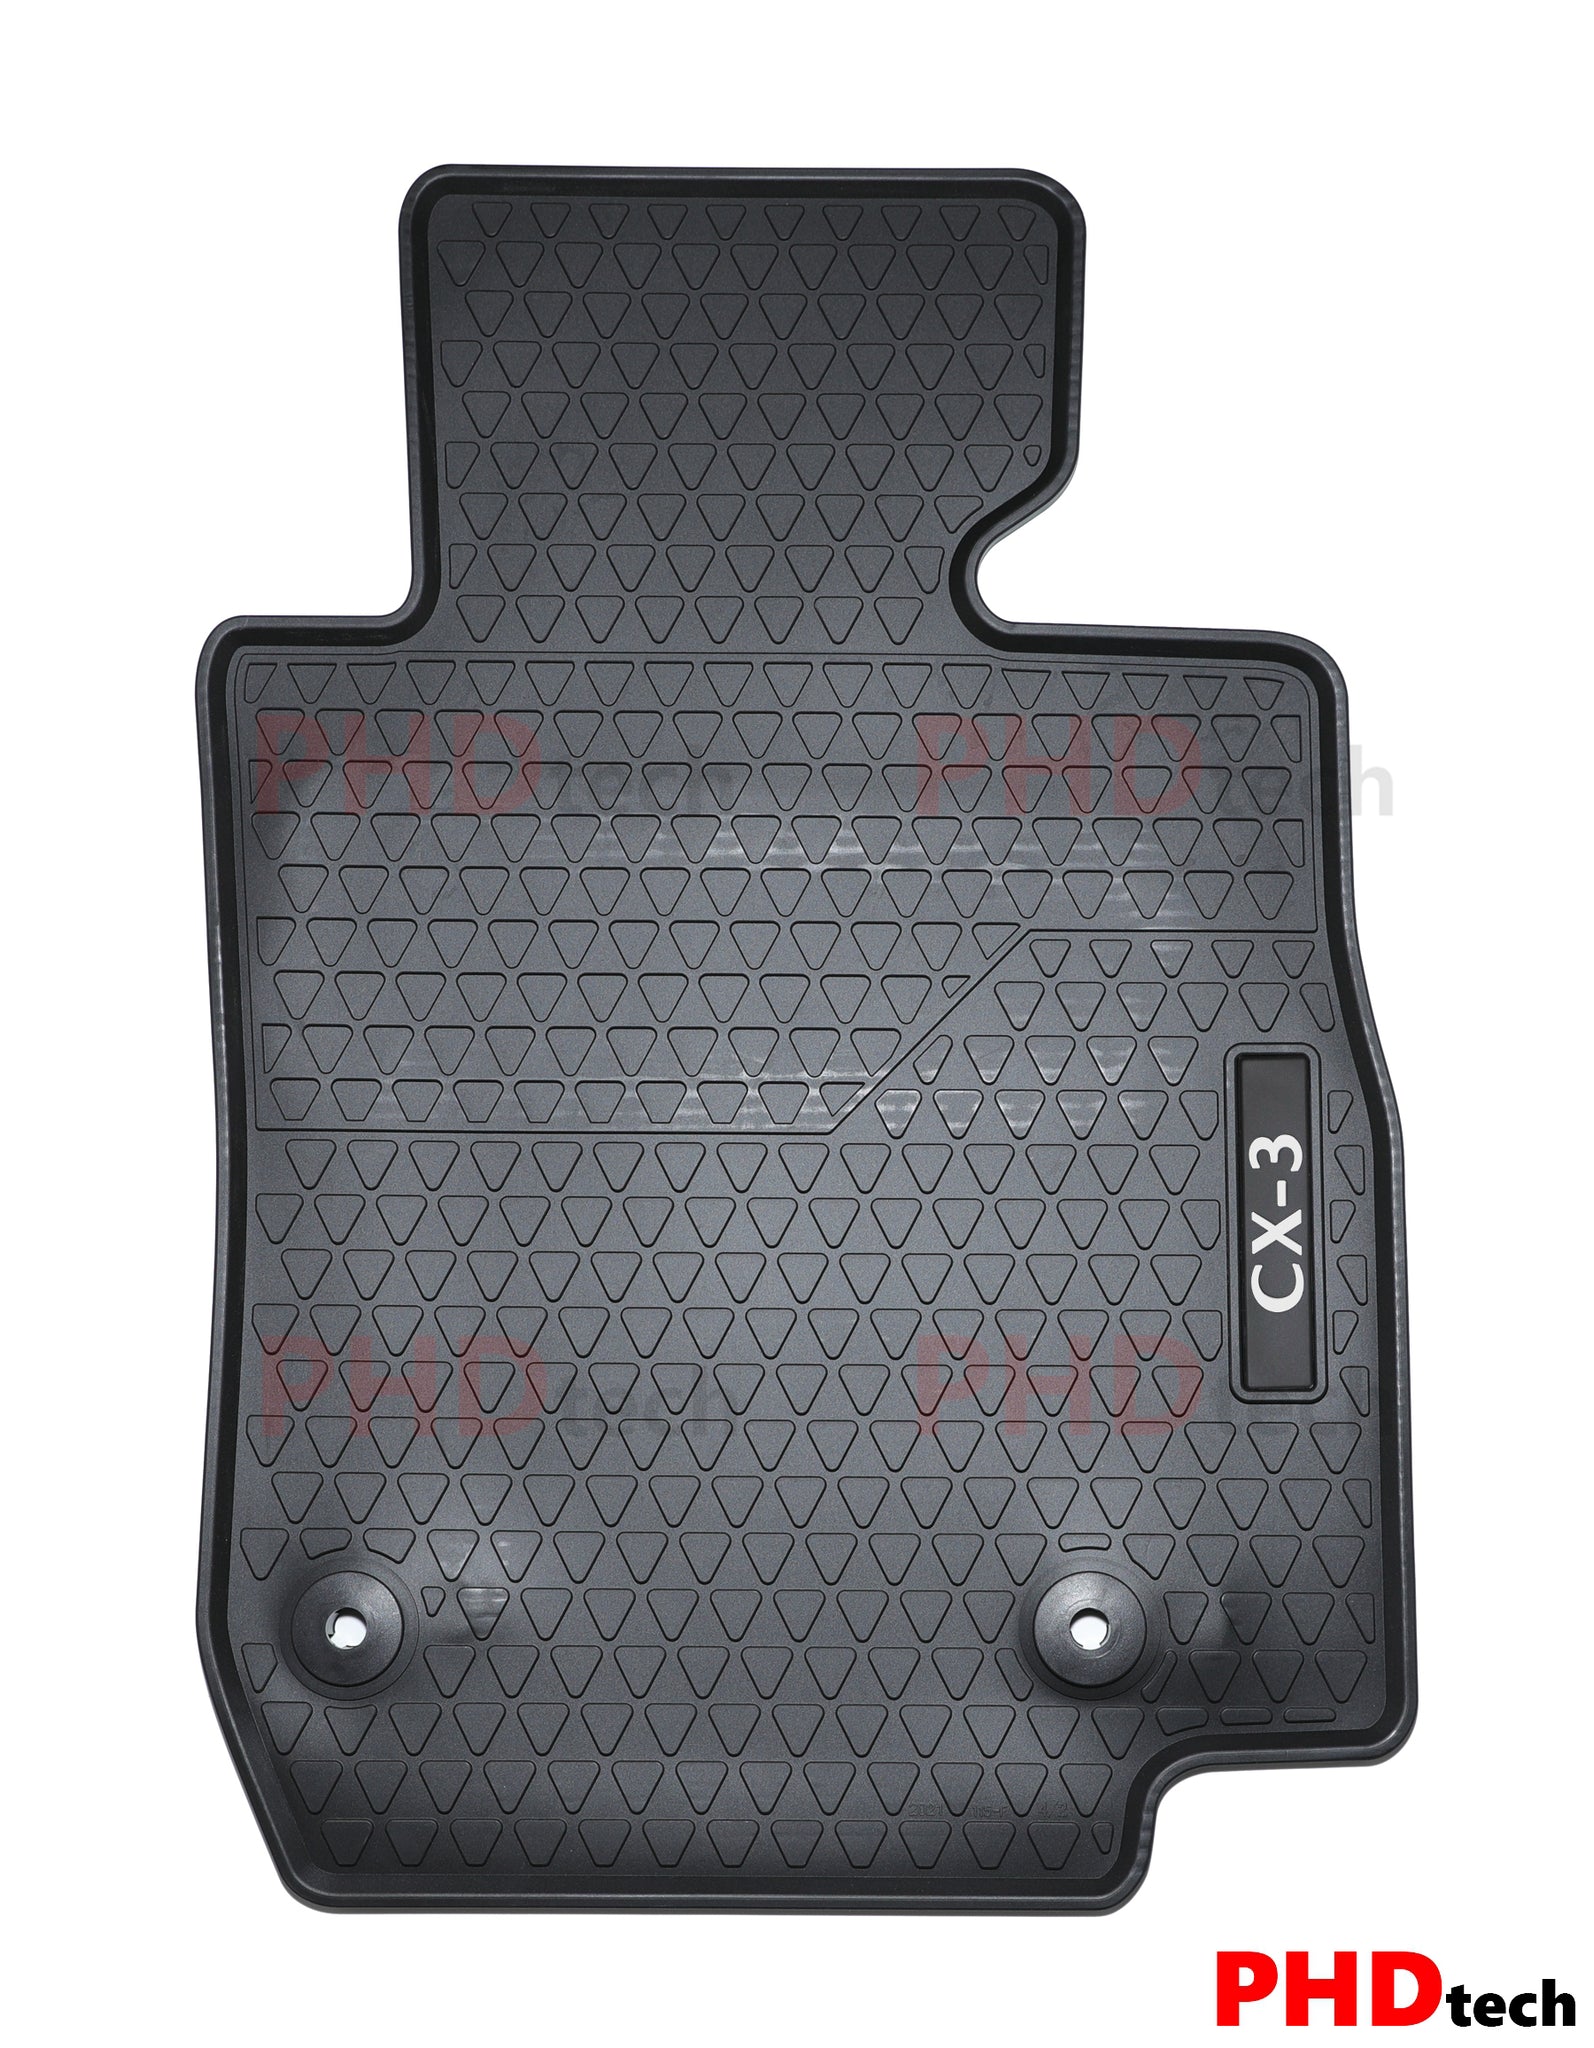 Back Order Feb.***All Weather Rubber Car Floor Mats Fit Mazda CX3